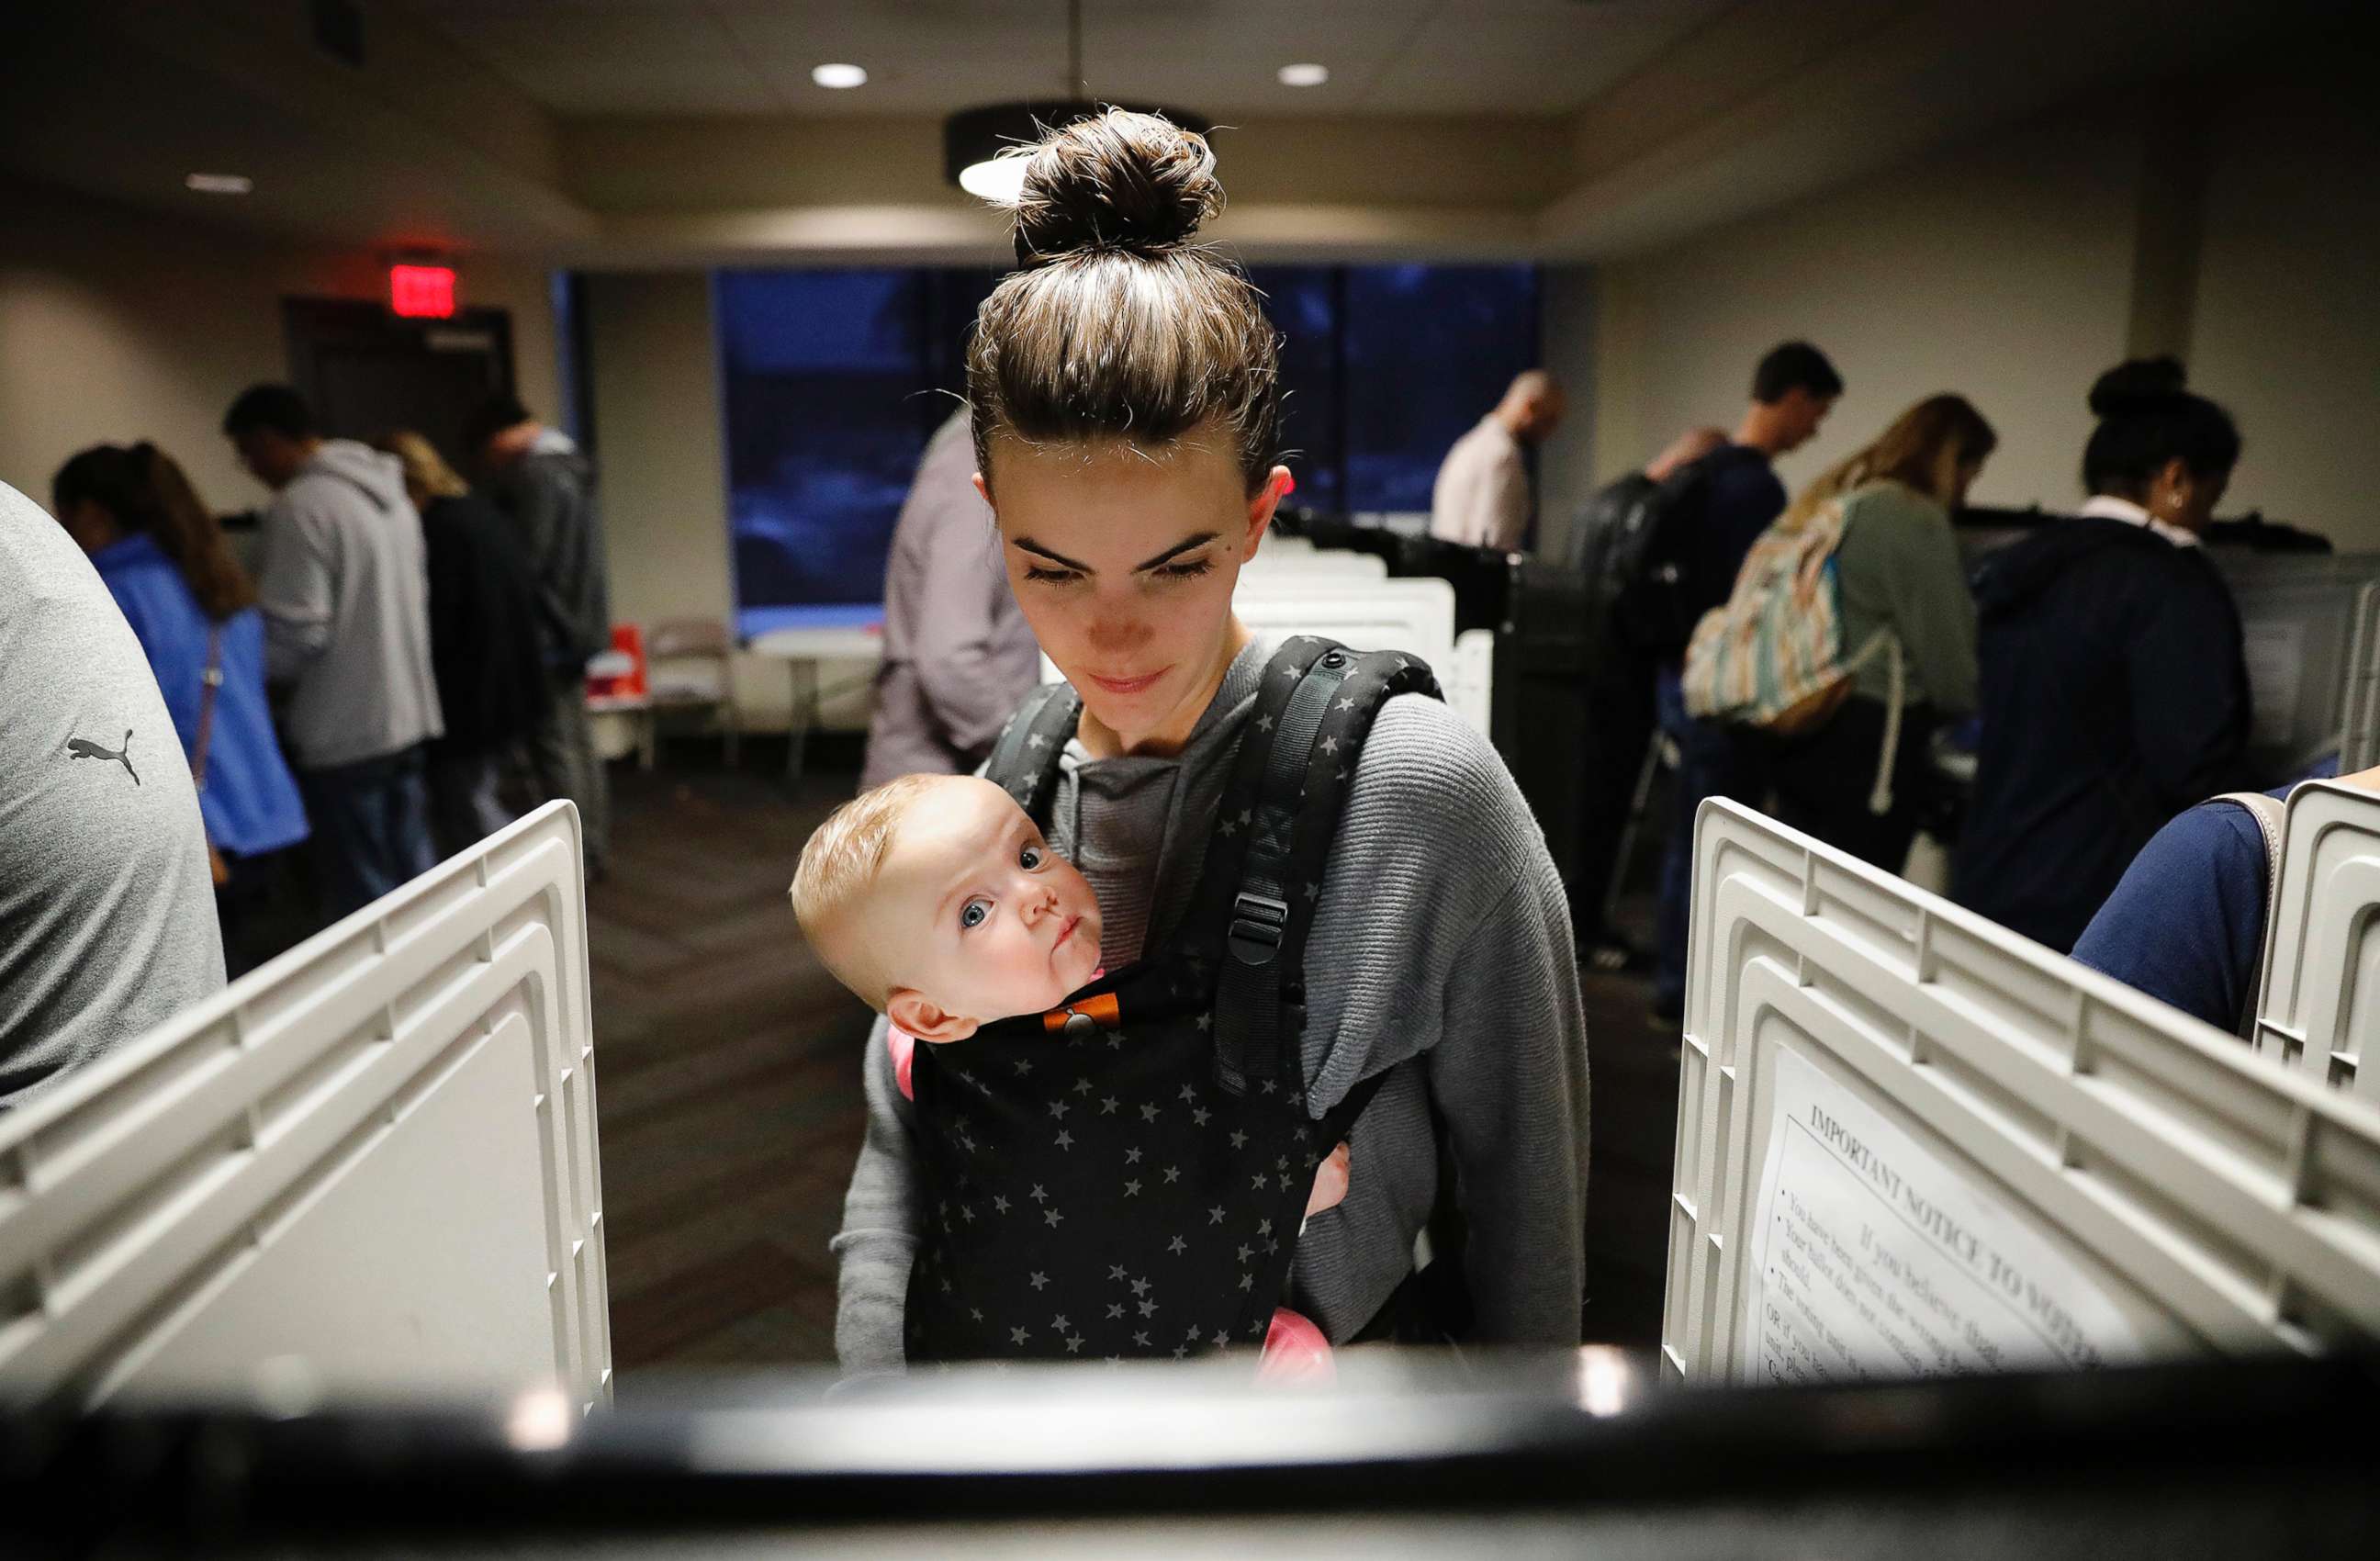 PHOTO: Kristen Leach votes with her daughter, Nora, on election day in Atlanta,  Nov. 6, 2018.